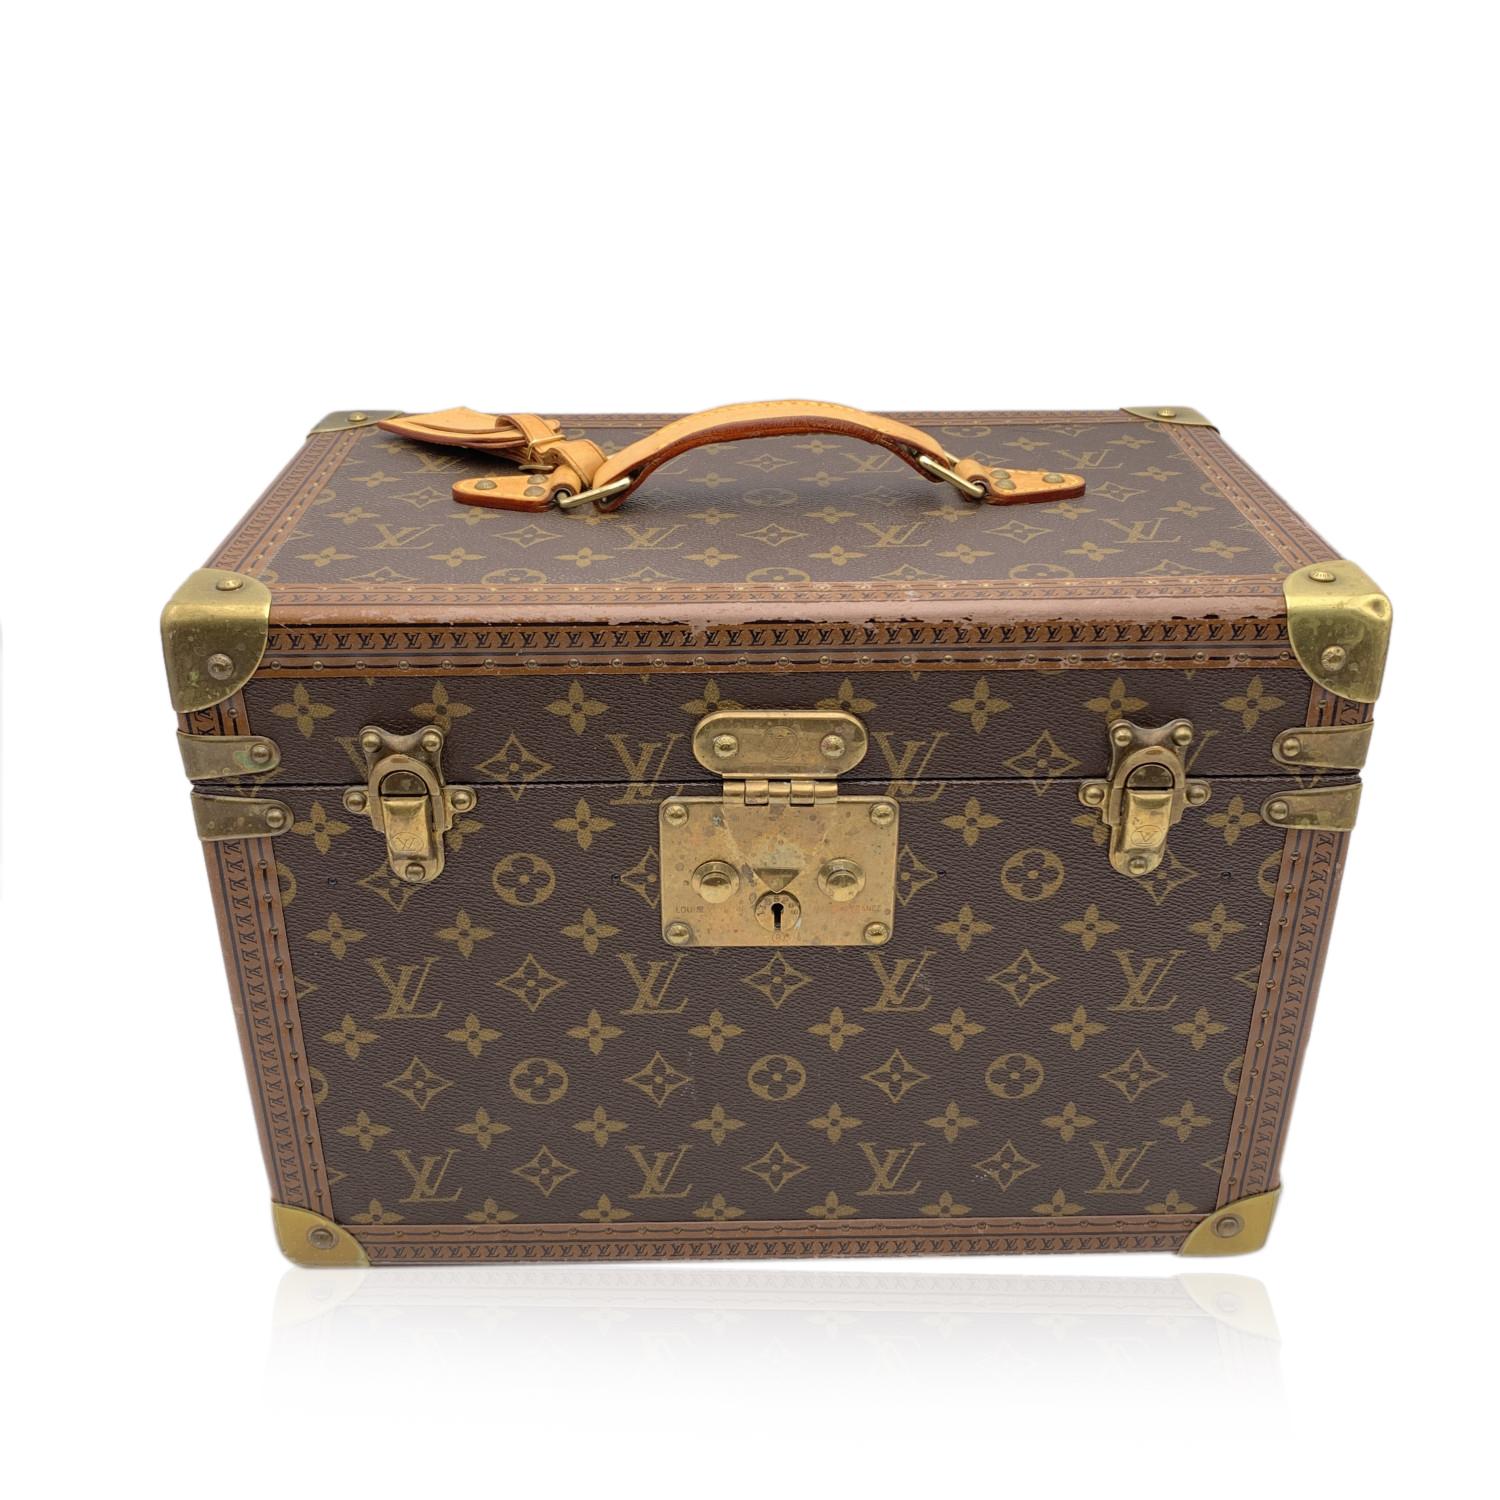 Splendid Louis Vuitton monogram 'Boite Pharmacie' cosmetic travel trunk/case . Made with timeless monogram canvas with leather handle and golden brass pieces. It features: reinforced corners, washable tan lining and 2 storage spaces (one has a